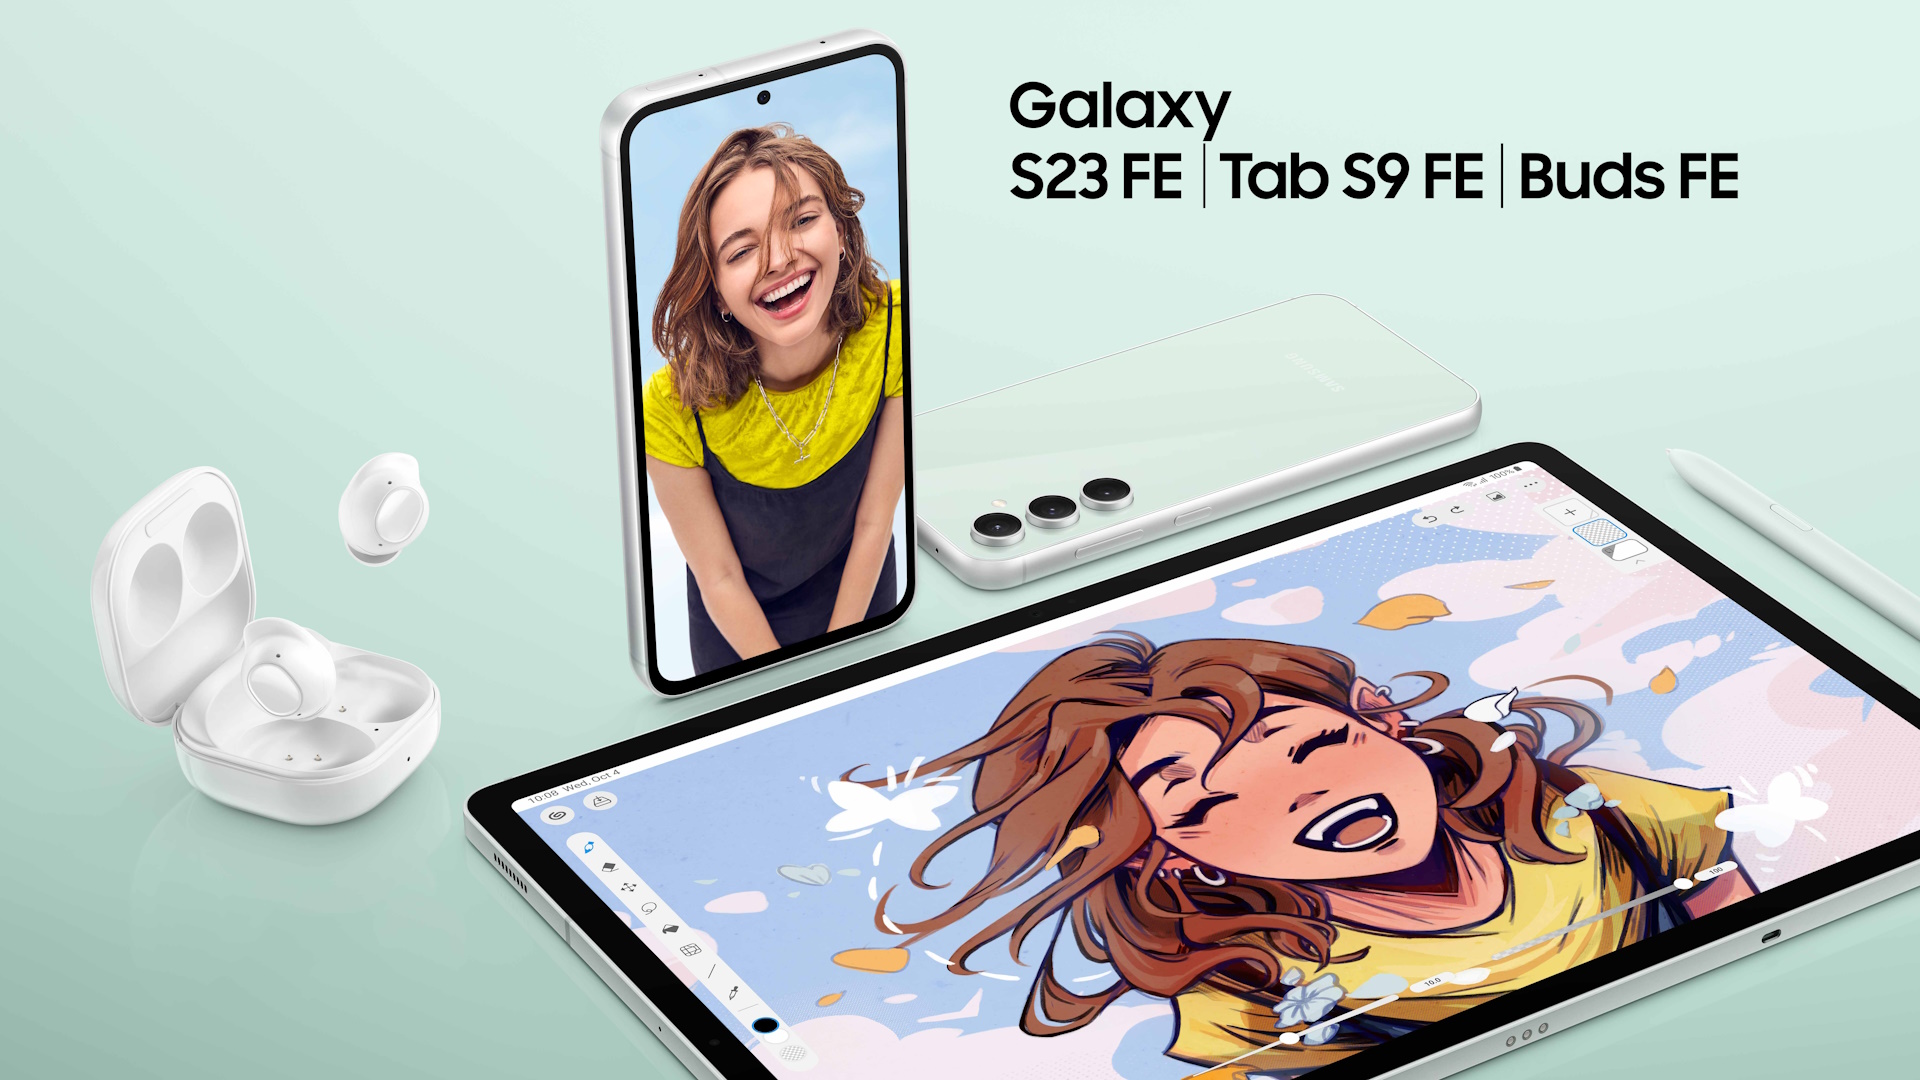 Samsung Galaxy S23 FE, Tab S9 FE and Buds FE headphones officially presented